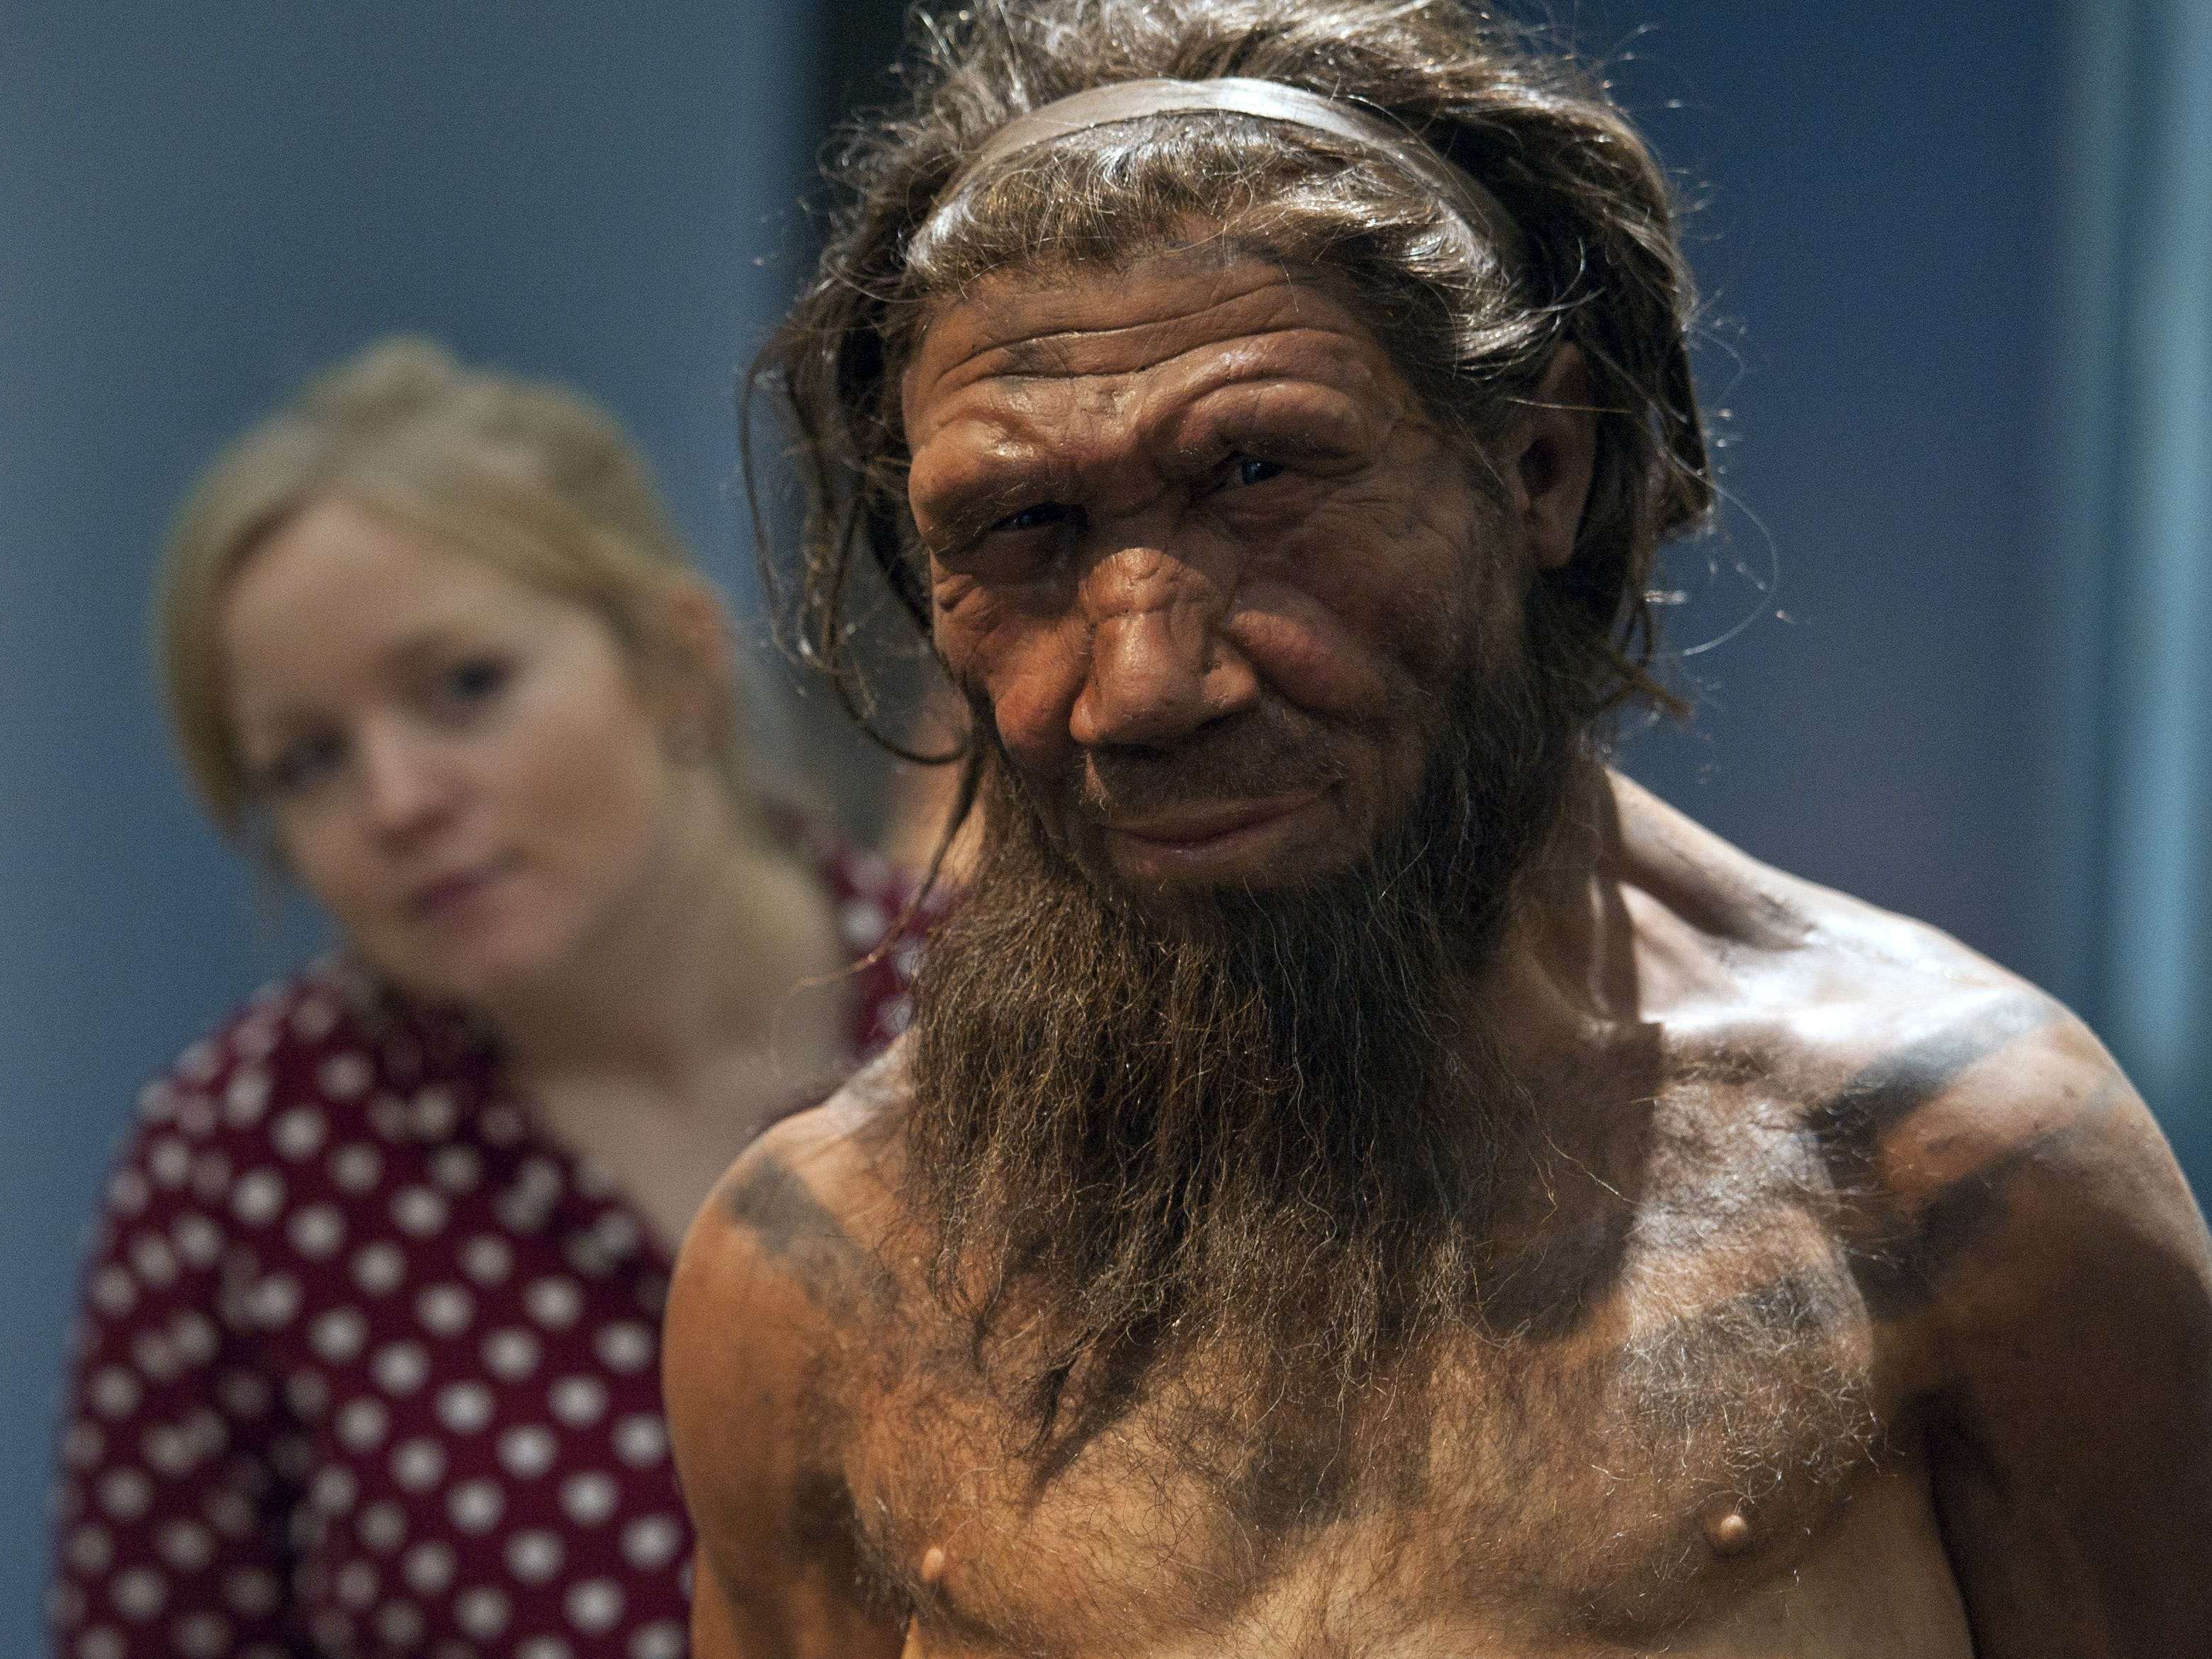 Dragon Man A Mysterious New Human Species Found In China Could Be A